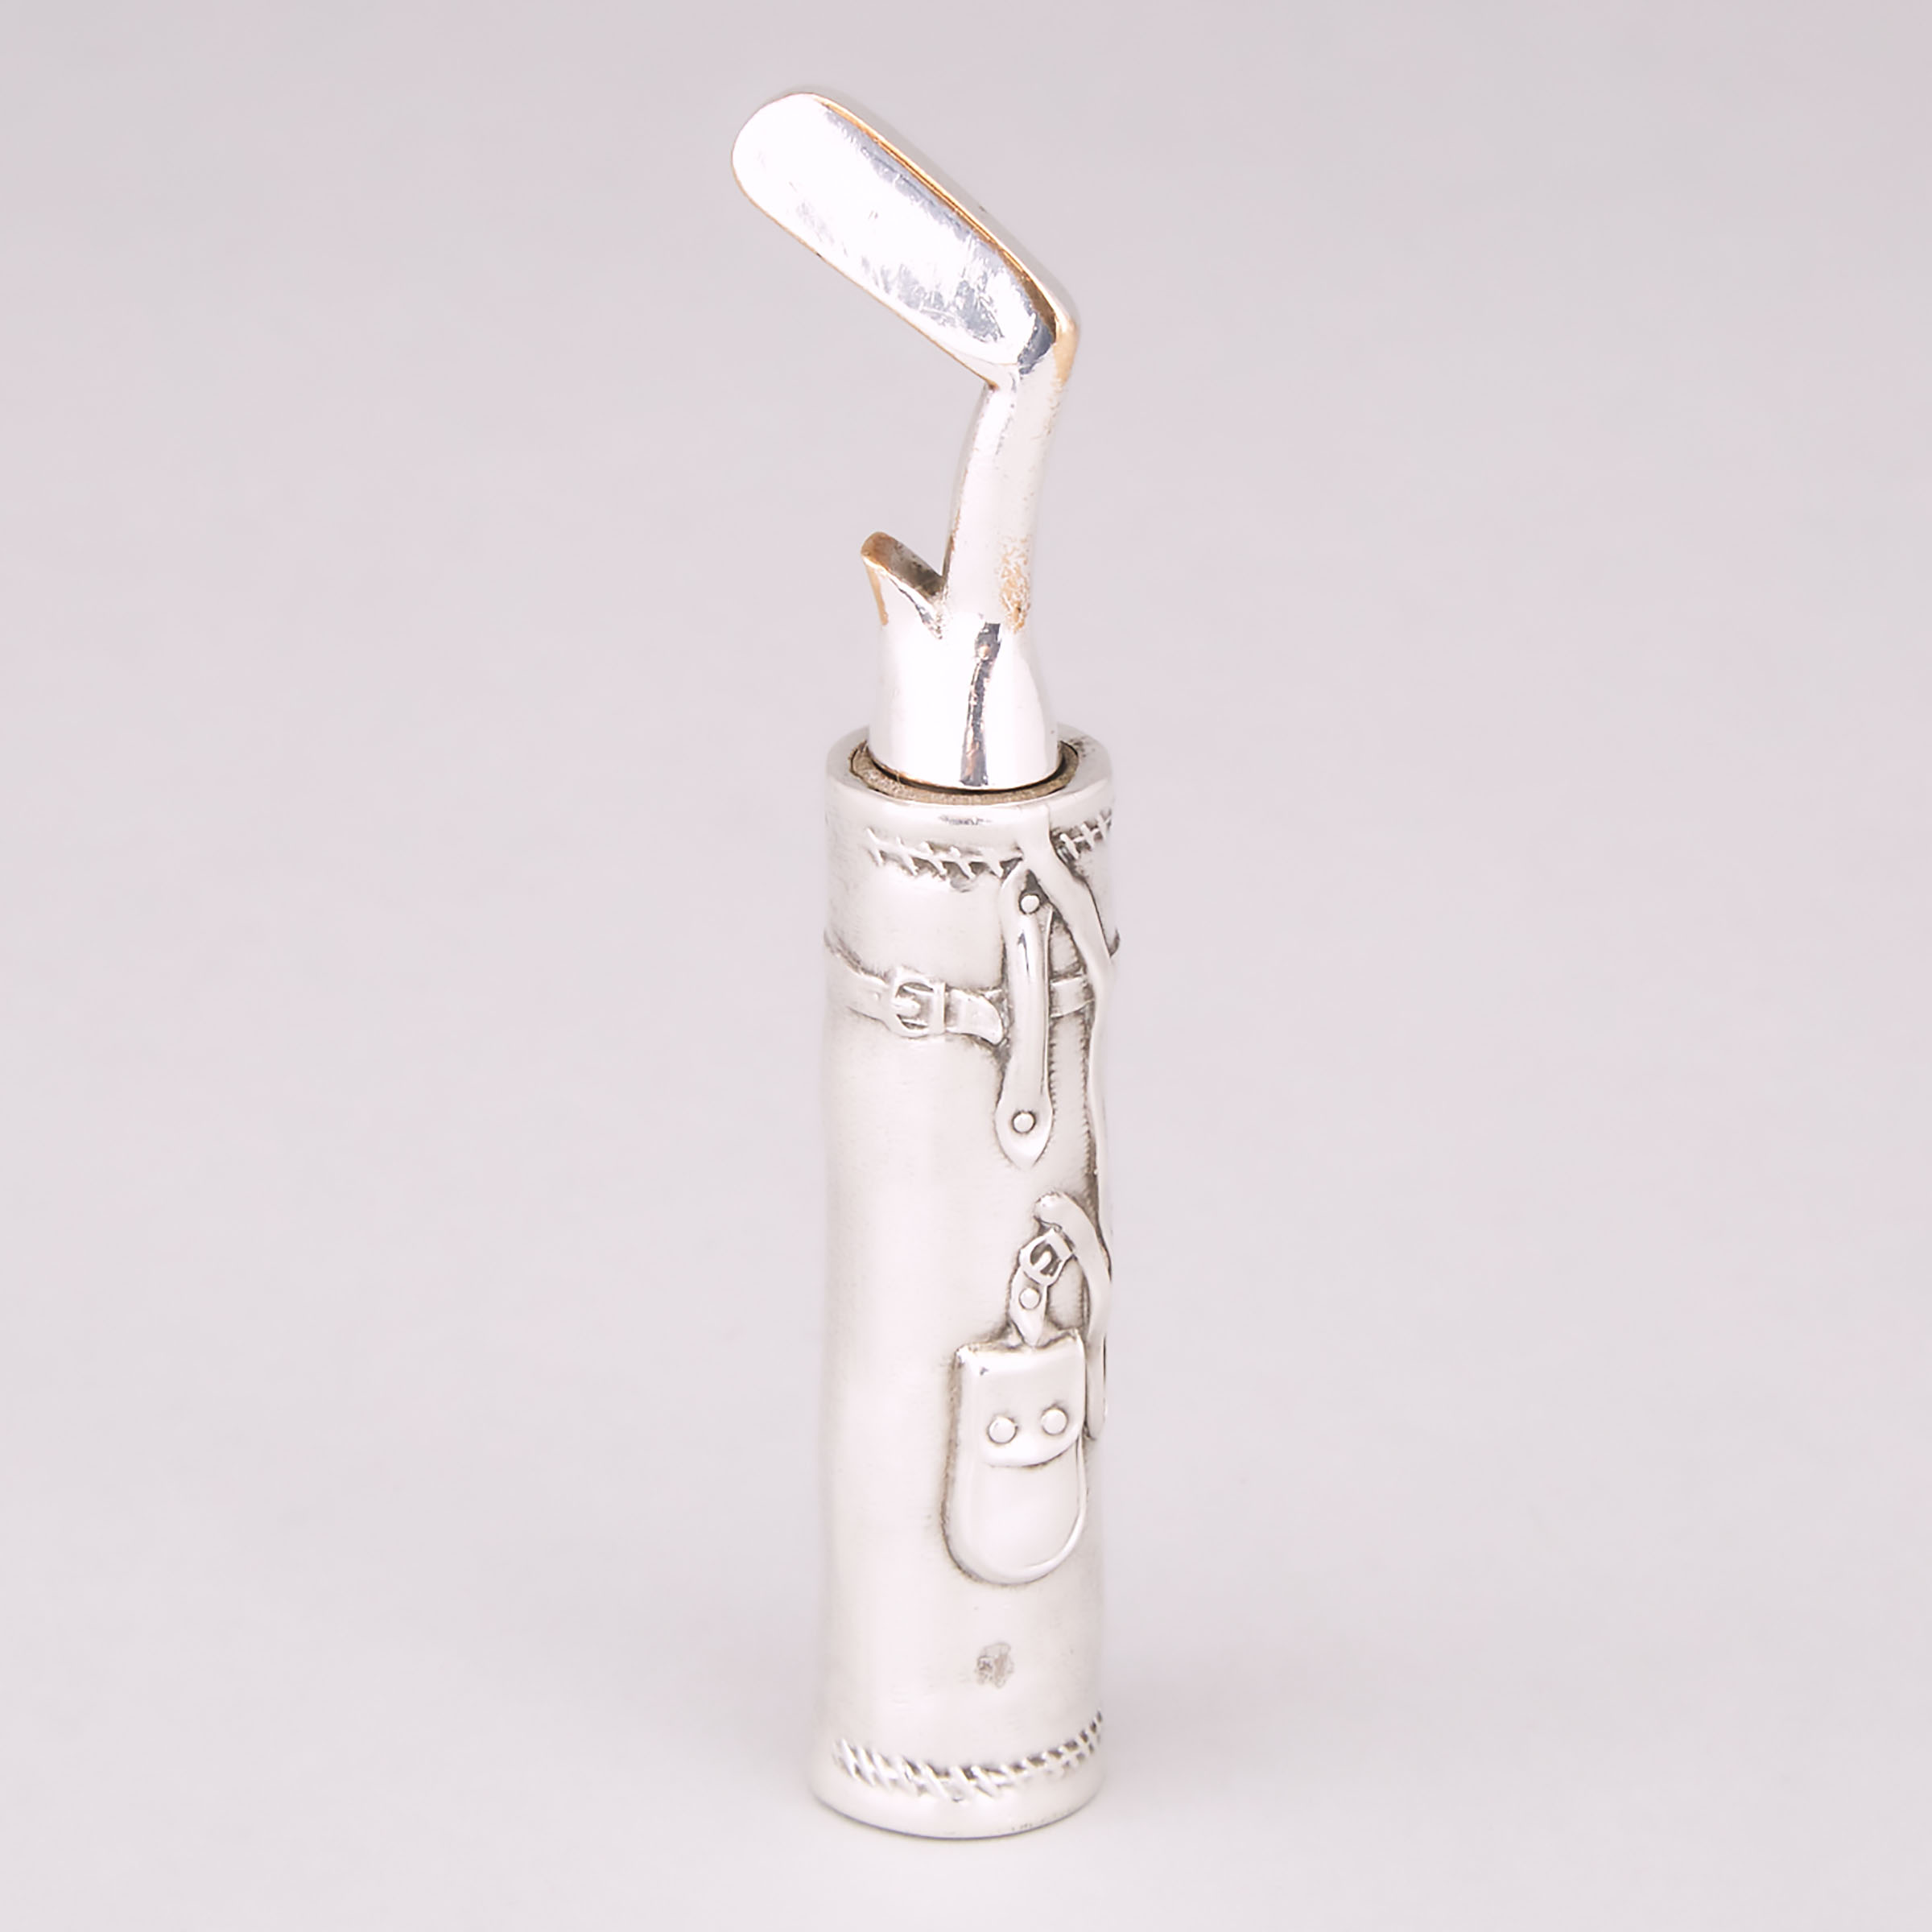 American Silver and Silver Plated Golf Bag Pocket Corkscrew, Roswell Blackinton & Co., North Attleboro, Mass., early 20th century